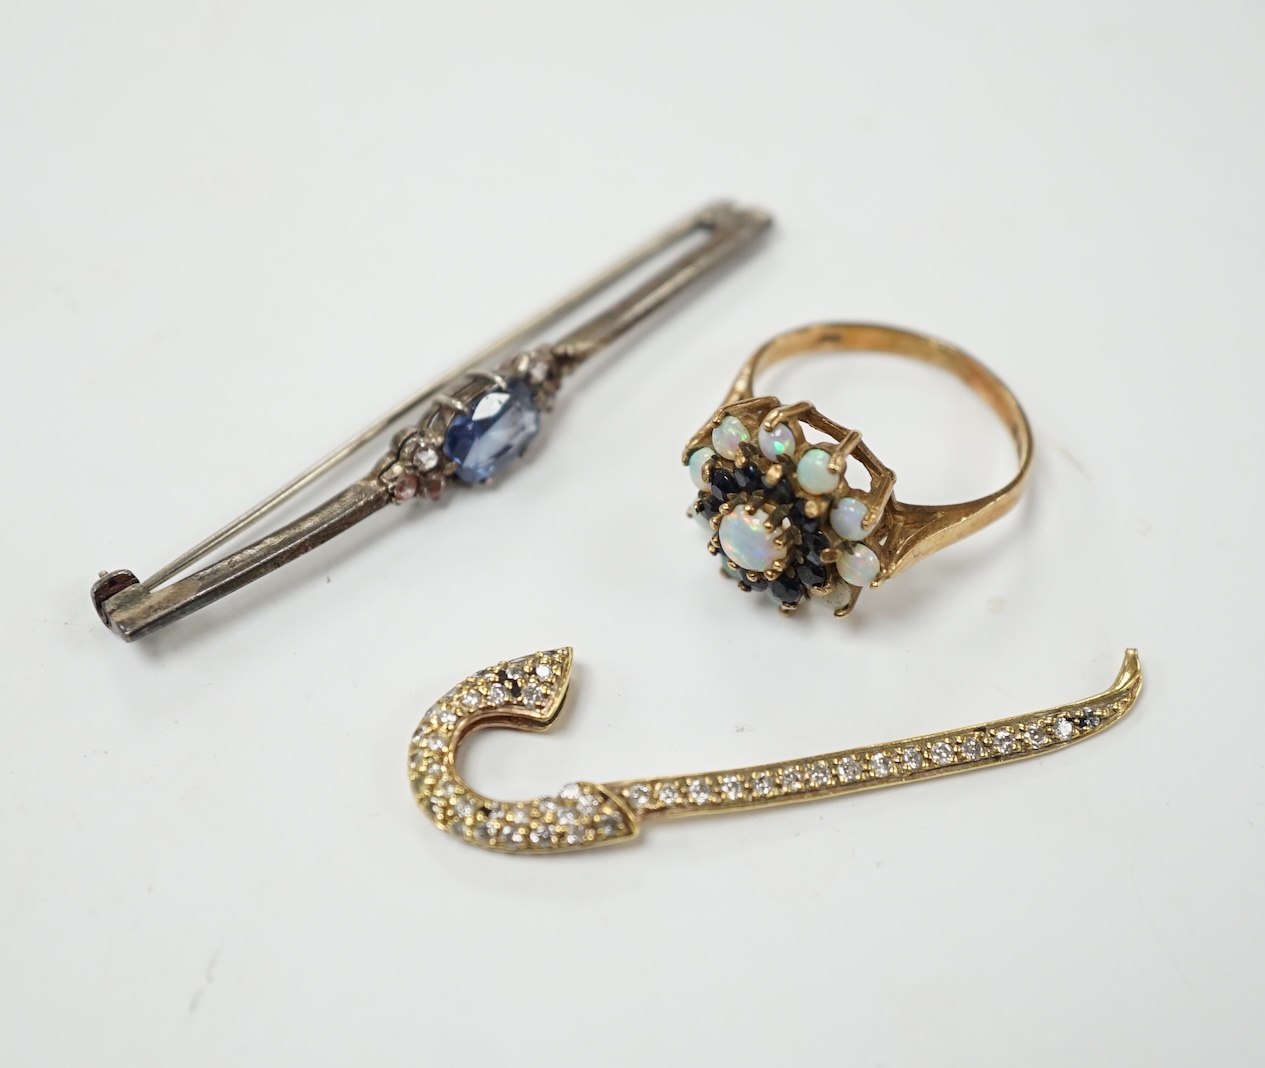 A yellow metal and pave set diamond miniature walking cane, 43mm, together with a 9ct gold, white opal and sapphire cluster set ring and a two colour sapphire set white metal bar brooch. Condition - poor to fair